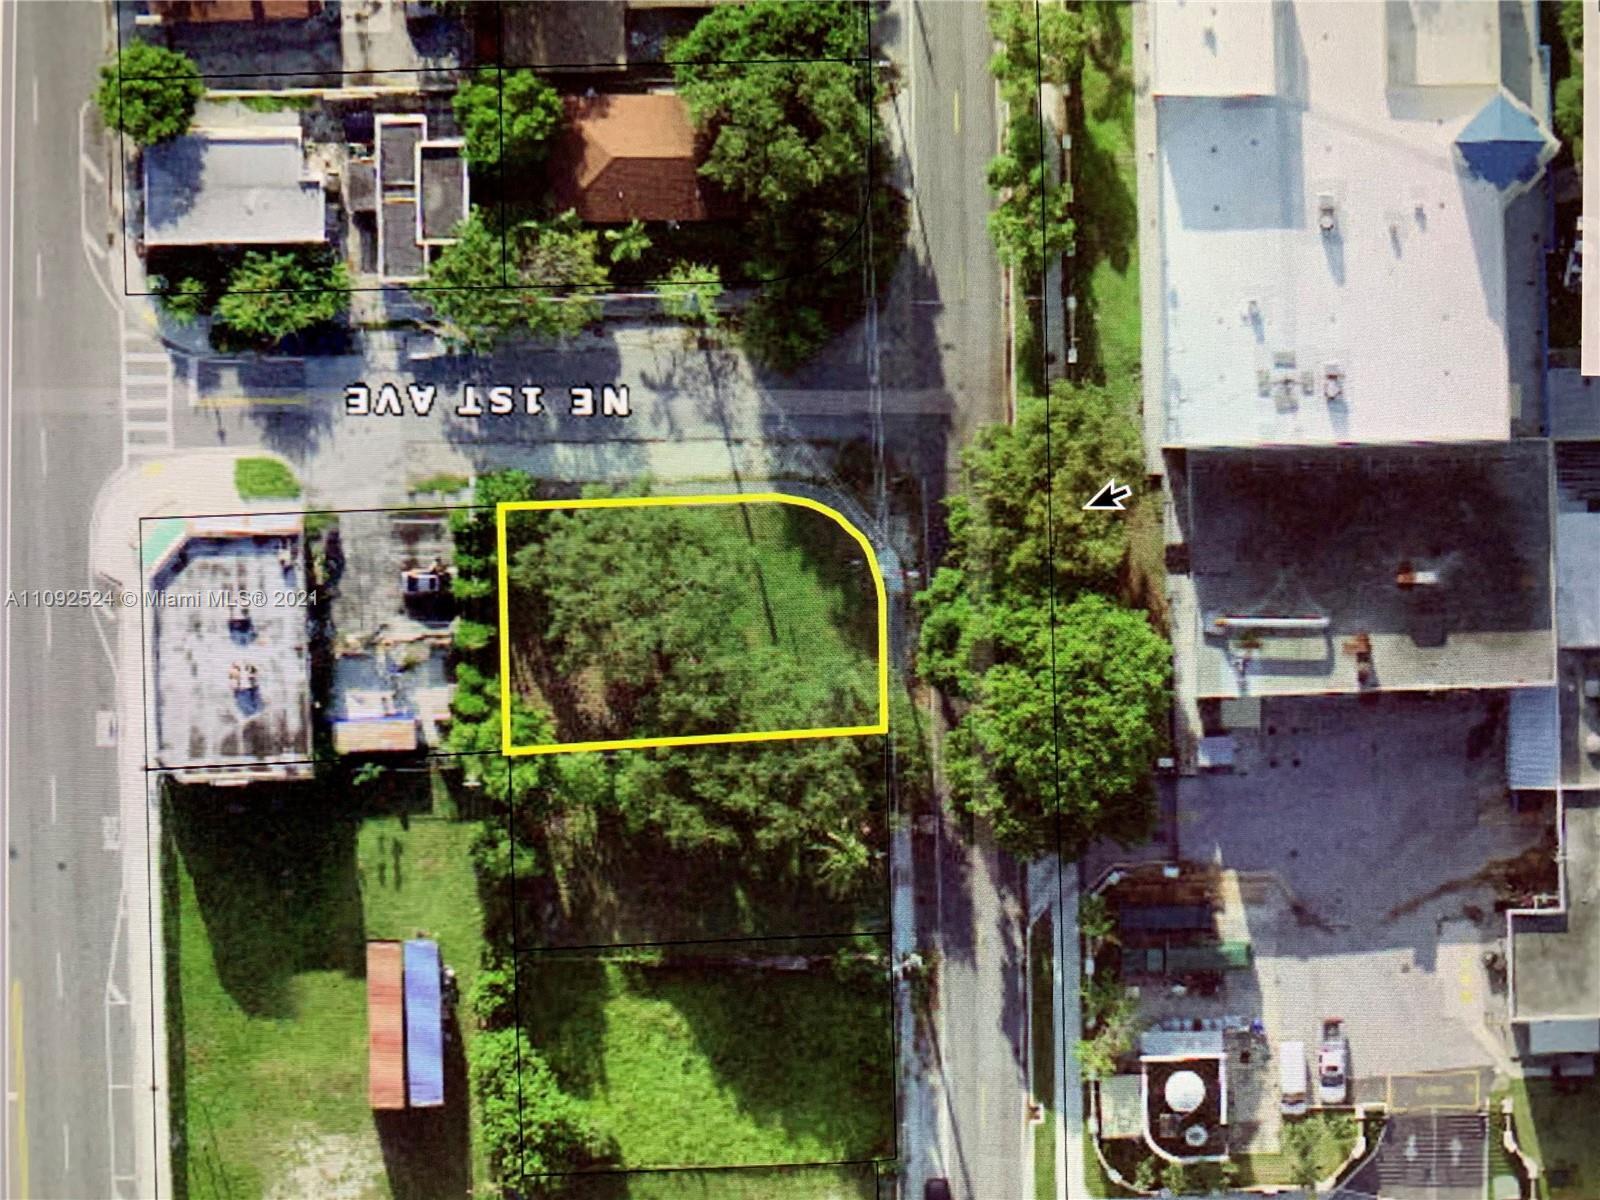 Well located Corner Lot. Zoned T4-O: residential or commercial uses. Easy access via 3 Miami streets